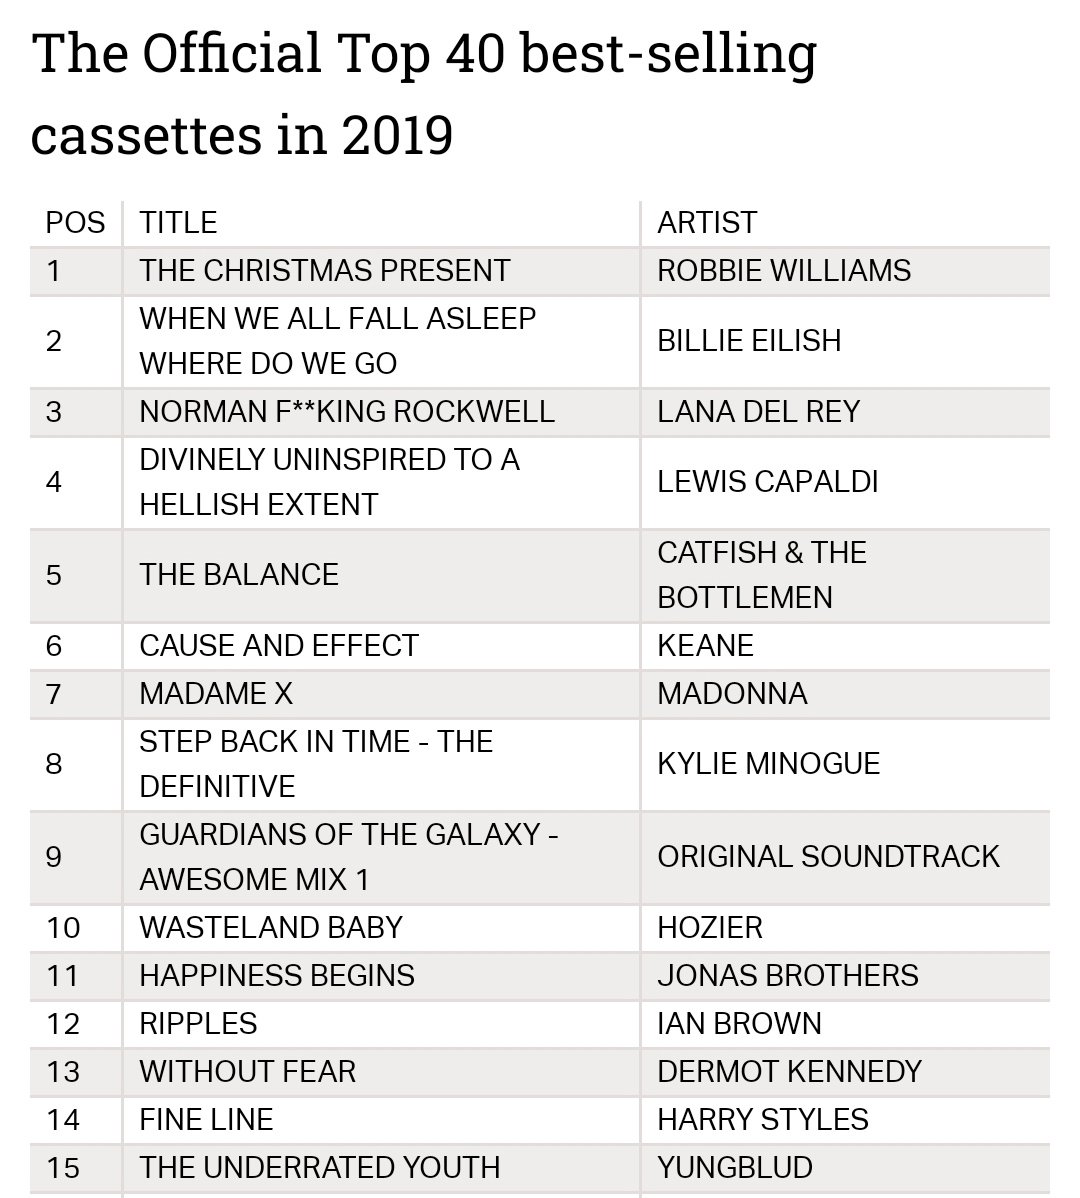 UK- "Adore you" reached #7 on UK spotify chart and "Fine Line" is the 14th best selling cassette of 2019 even tho it was released in MID december.